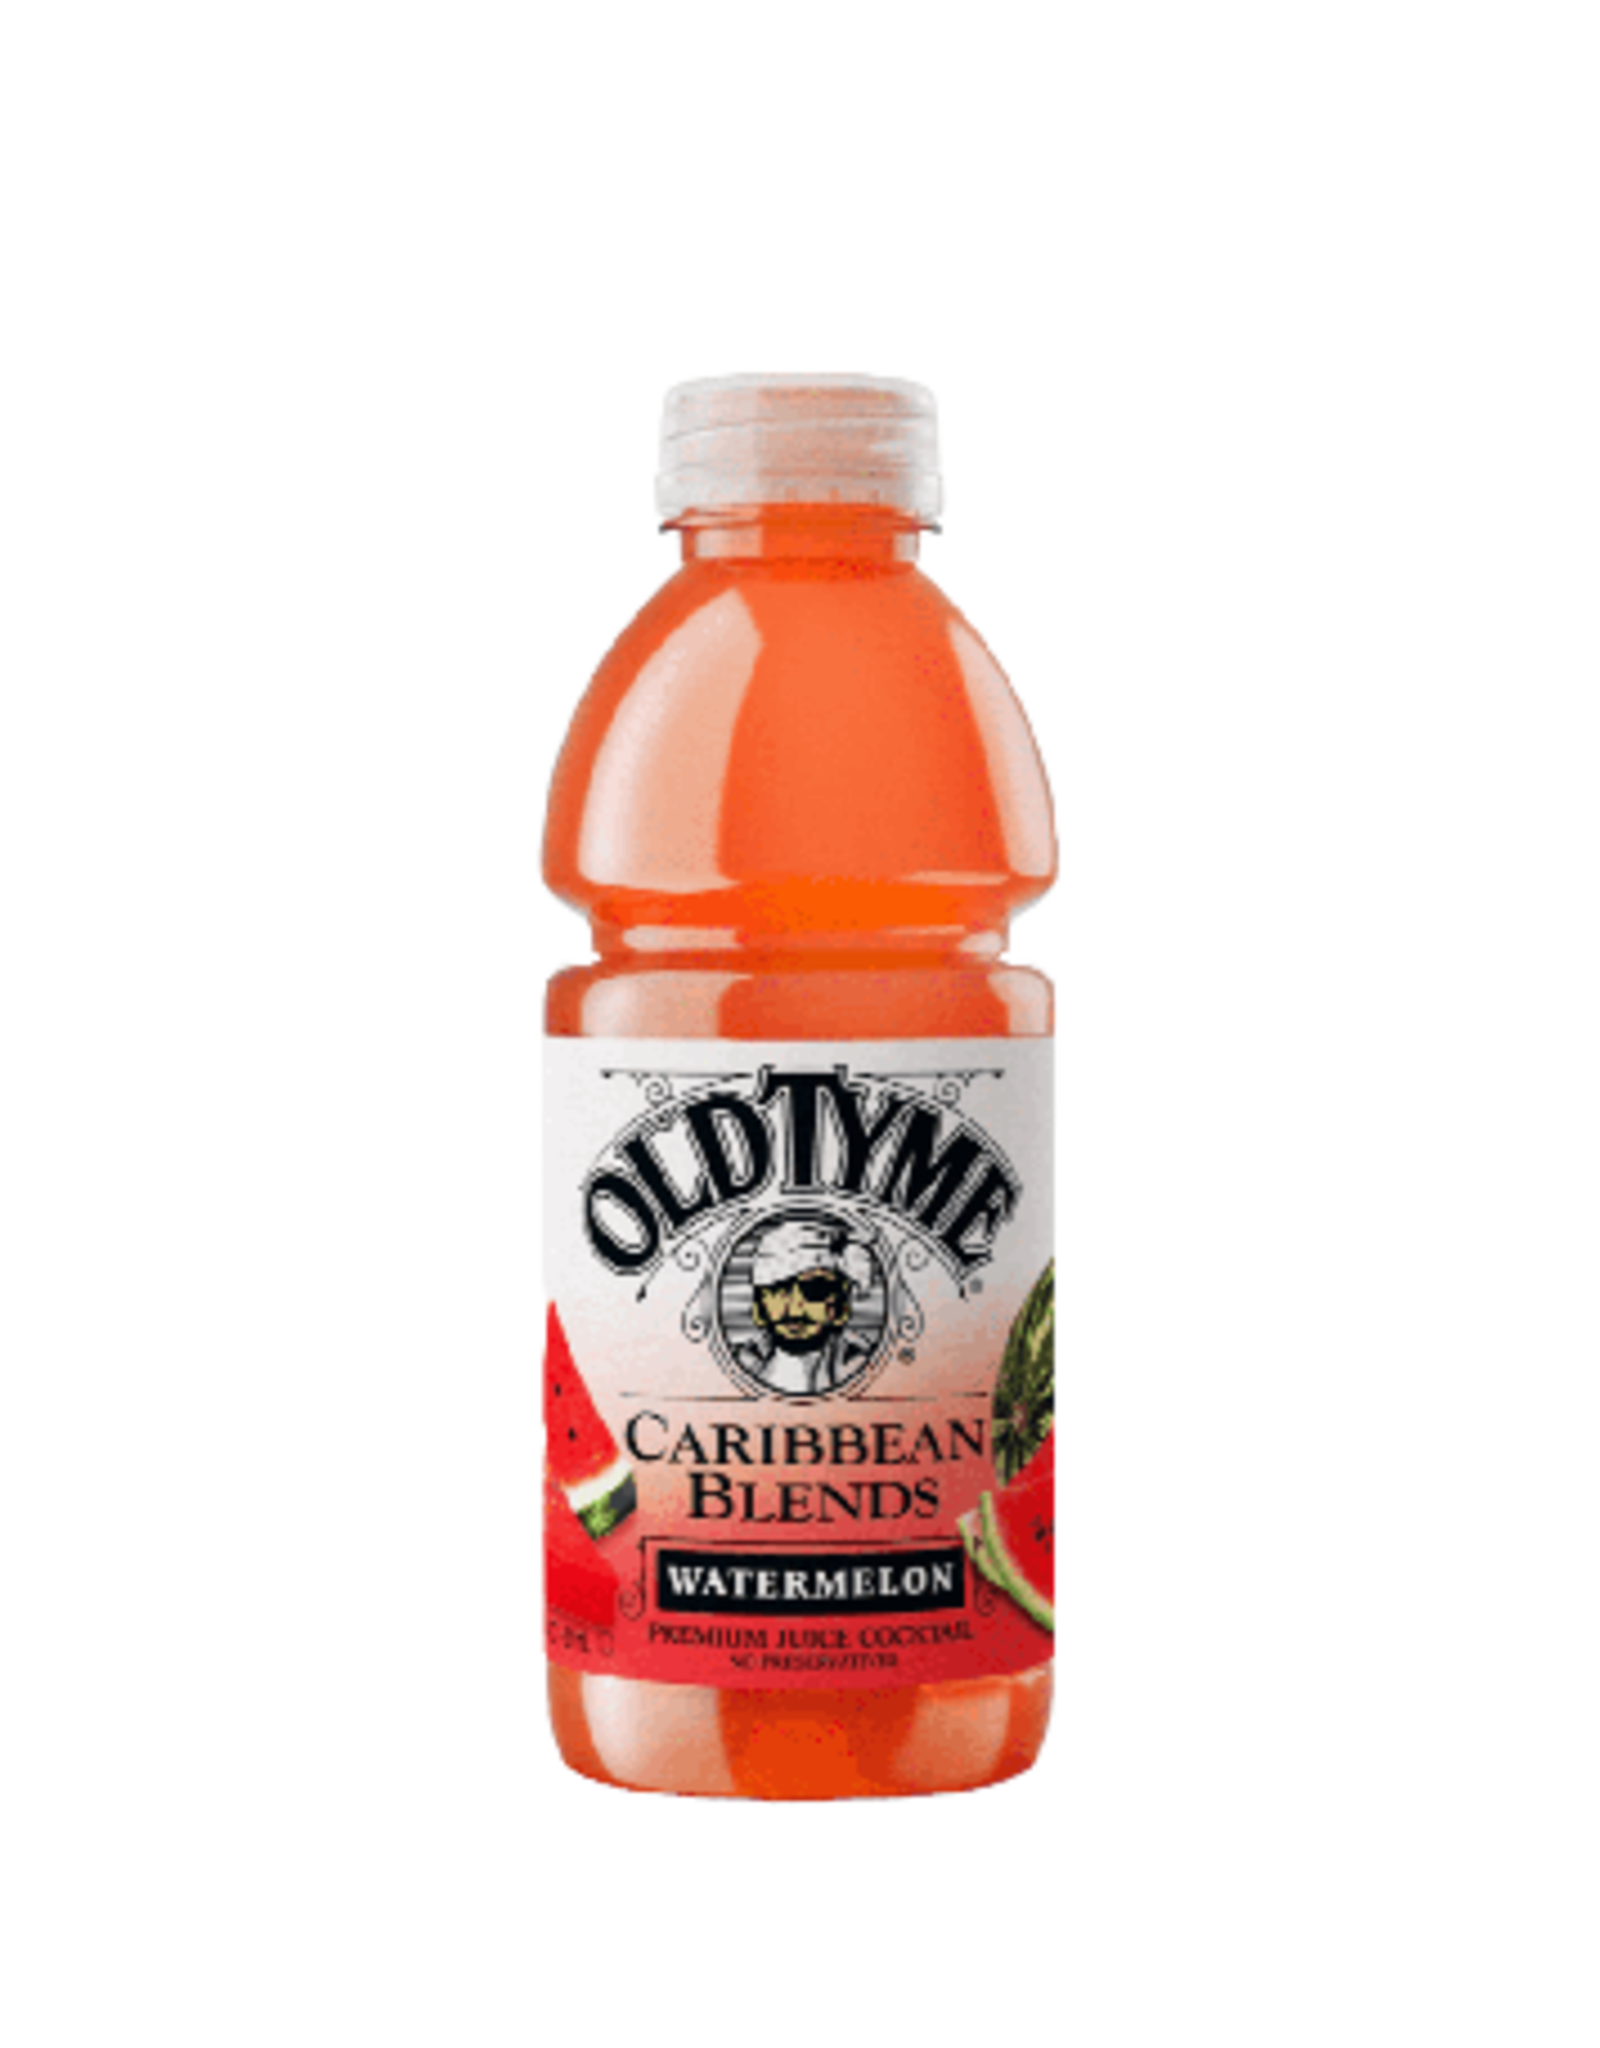 Old Tyme Caribbean Blends Watermelon